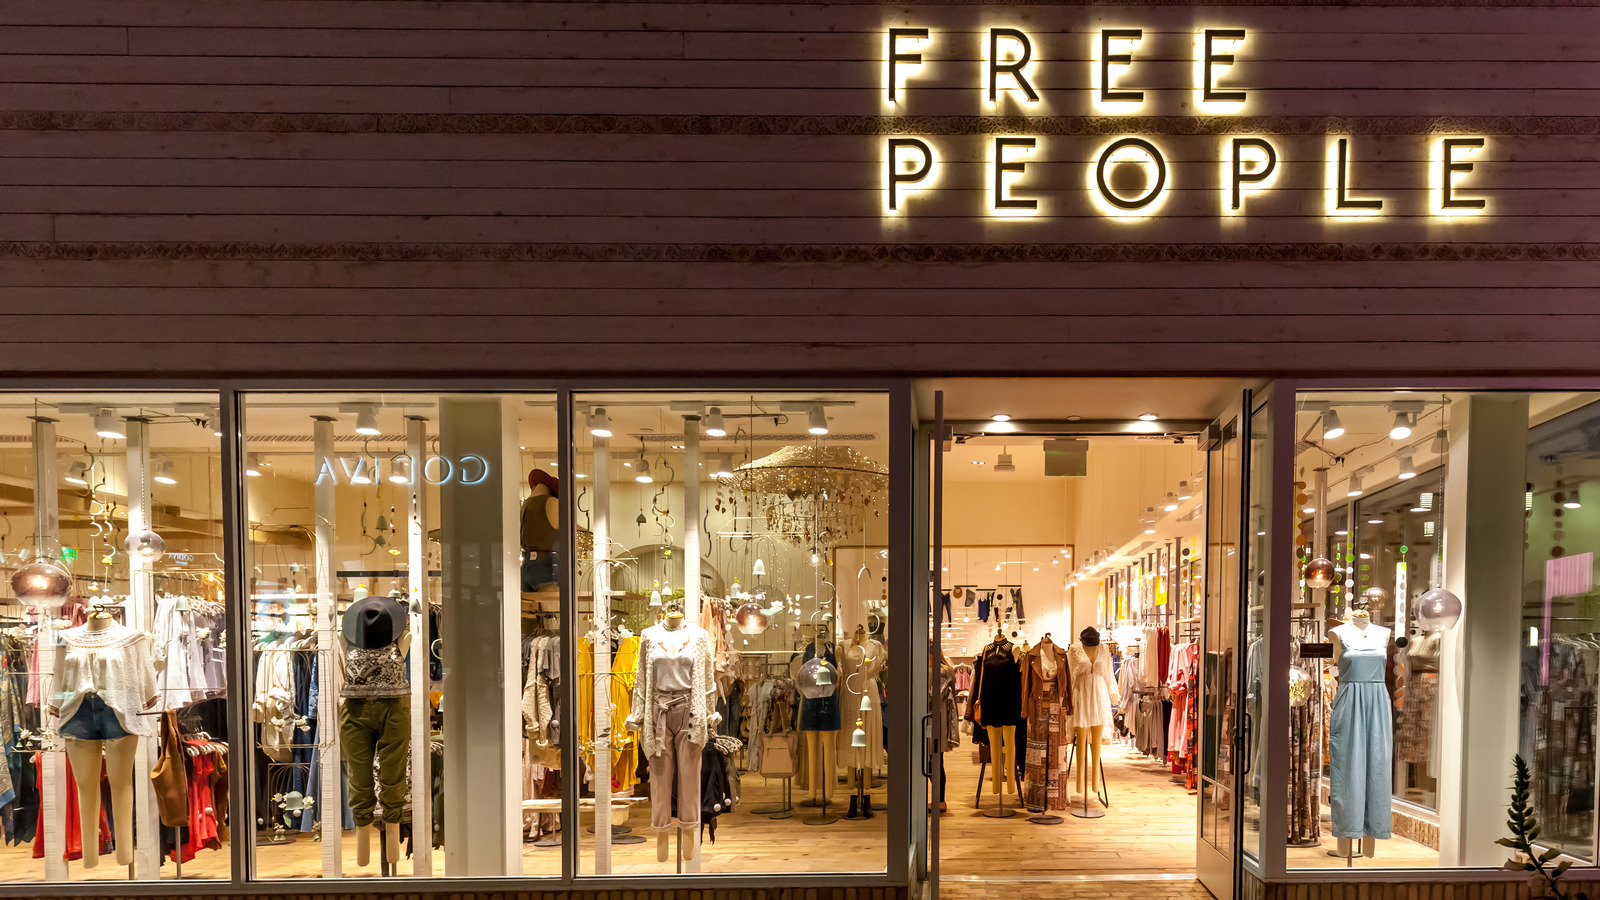 Is Free People Clothing Worth It?